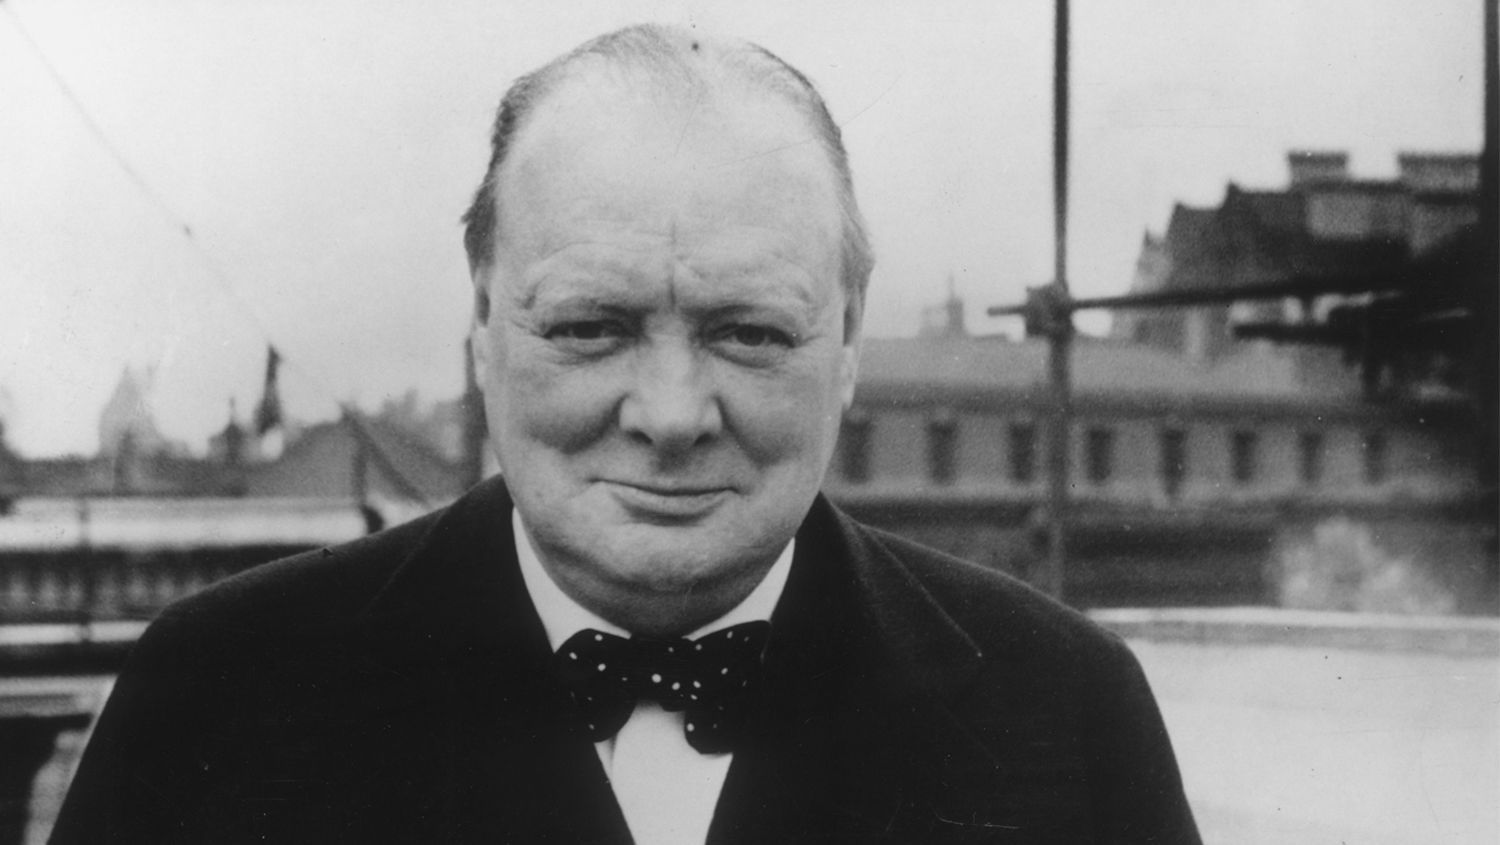 Winston Churchill - inspirational and enigmatic leader.